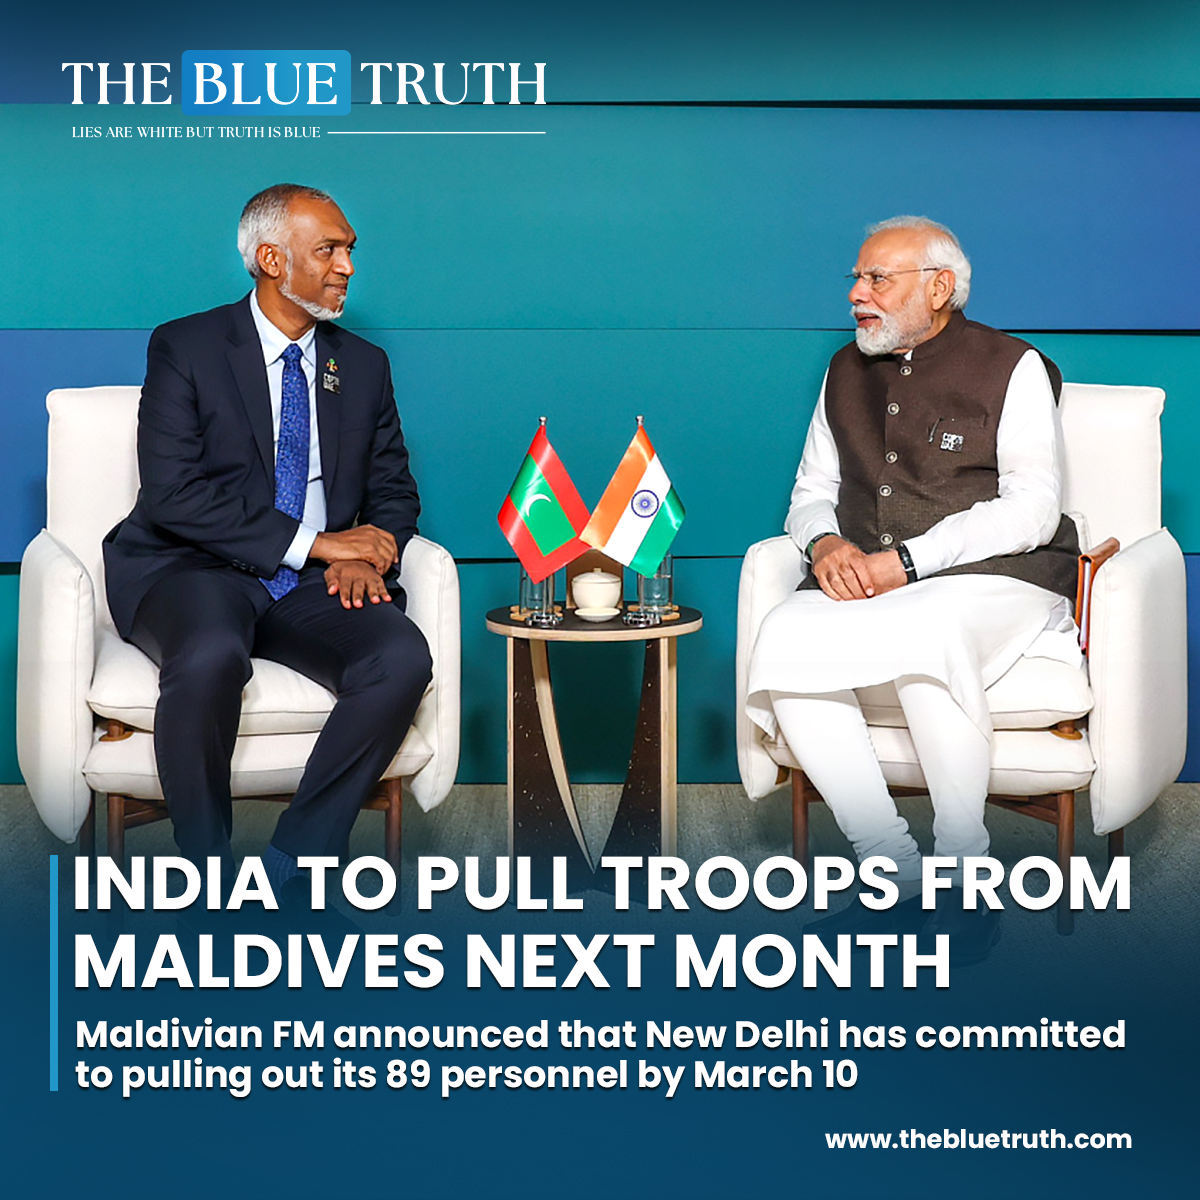 India has agreed to commence the withdrawal of its troops stationed in the Maldives starting next month.
#IndiaMaldivesRelations #TroopWithdrawal
#DiplomaticAgreement #RegionalSecurity
#ForeignPolicyUpdate #MilitaryPresence
#StrategicRelations #tbt #thebluetruth